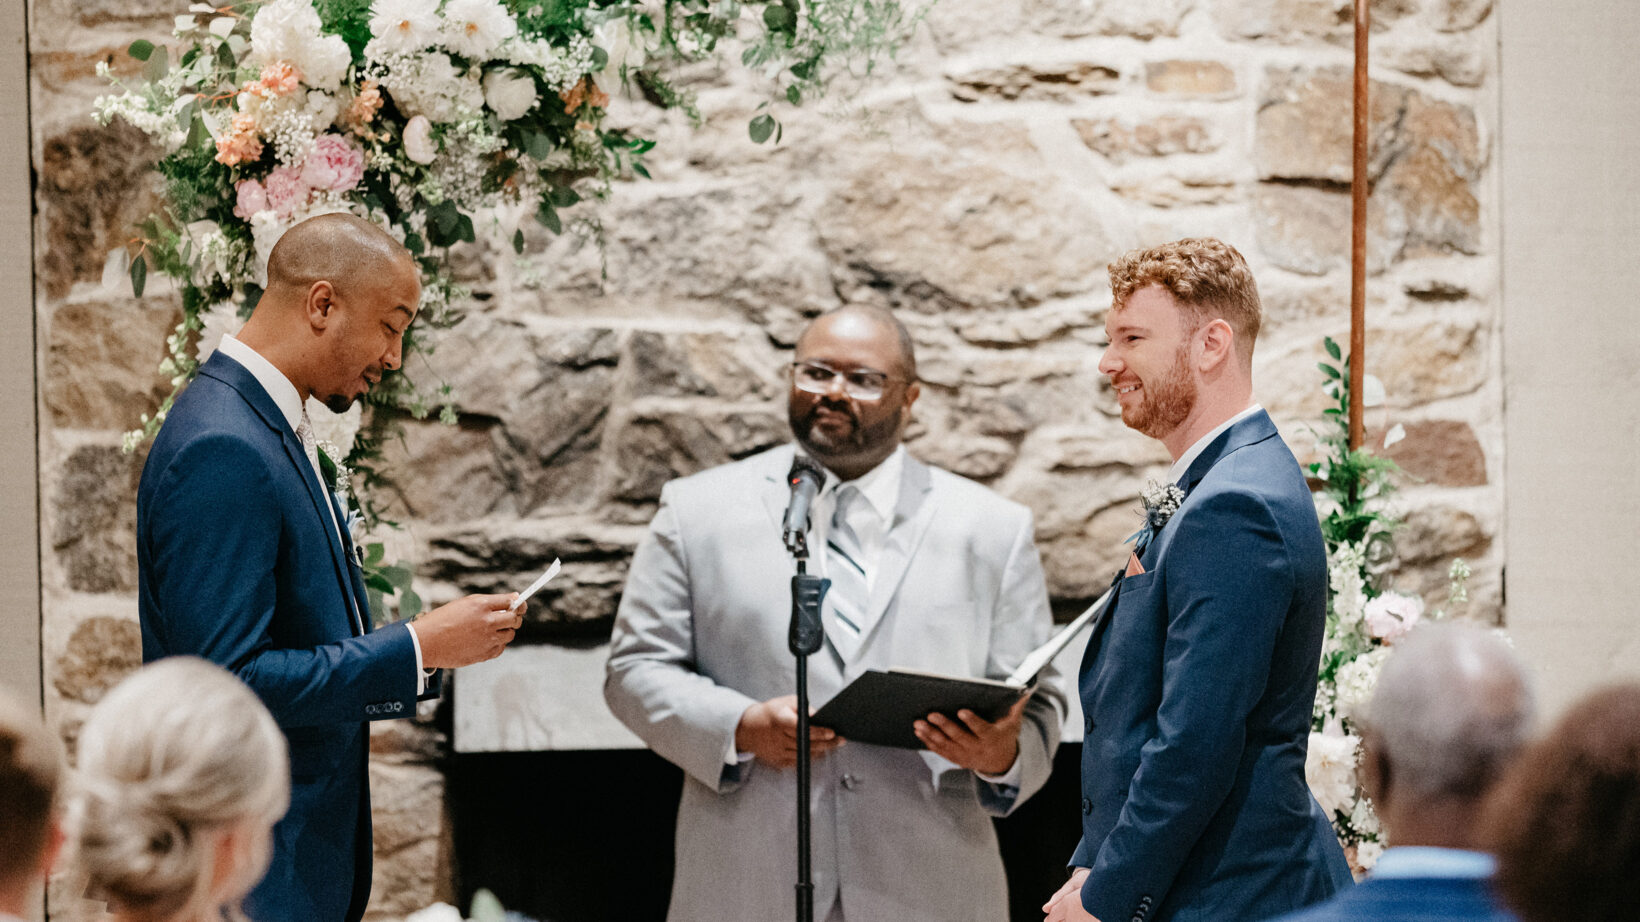 two grooms saying their vows in front of a preacher, flower archway, and stone wall